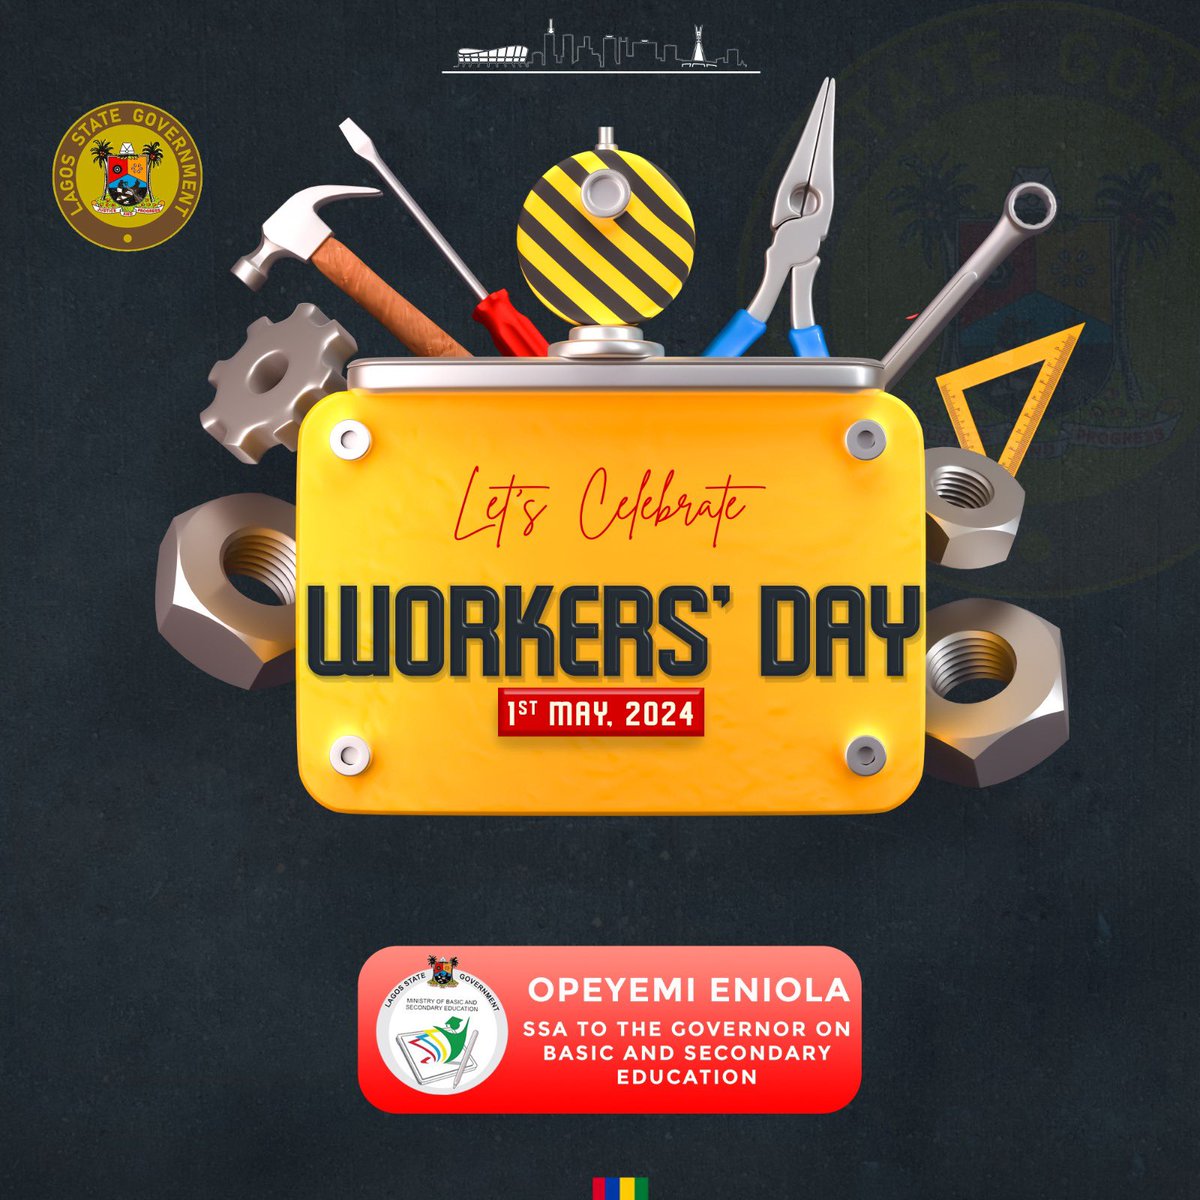 On this special day, we salute all workers, & especially our teachers and non-teaching staff, for their unwavering dedication & commitment to their jobs. Your hard work, perseverance, & passion do not go unnoticed, and we are grateful for everything you do. Happy #Workers’ day!